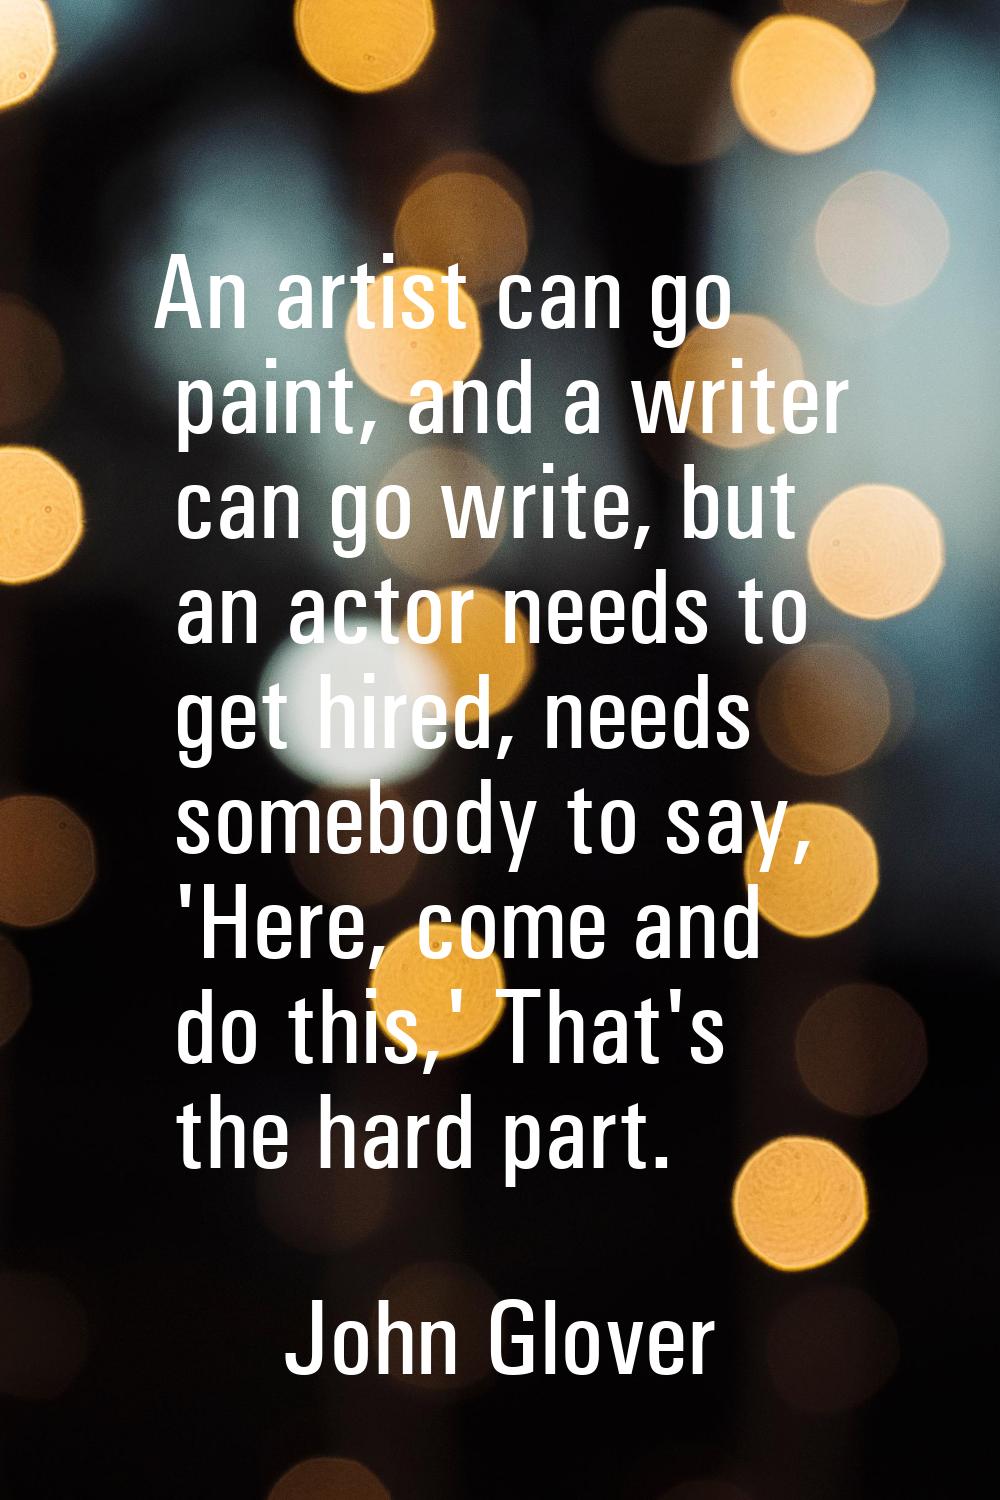 An artist can go paint, and a writer can go write, but an actor needs to get hired, needs somebody 